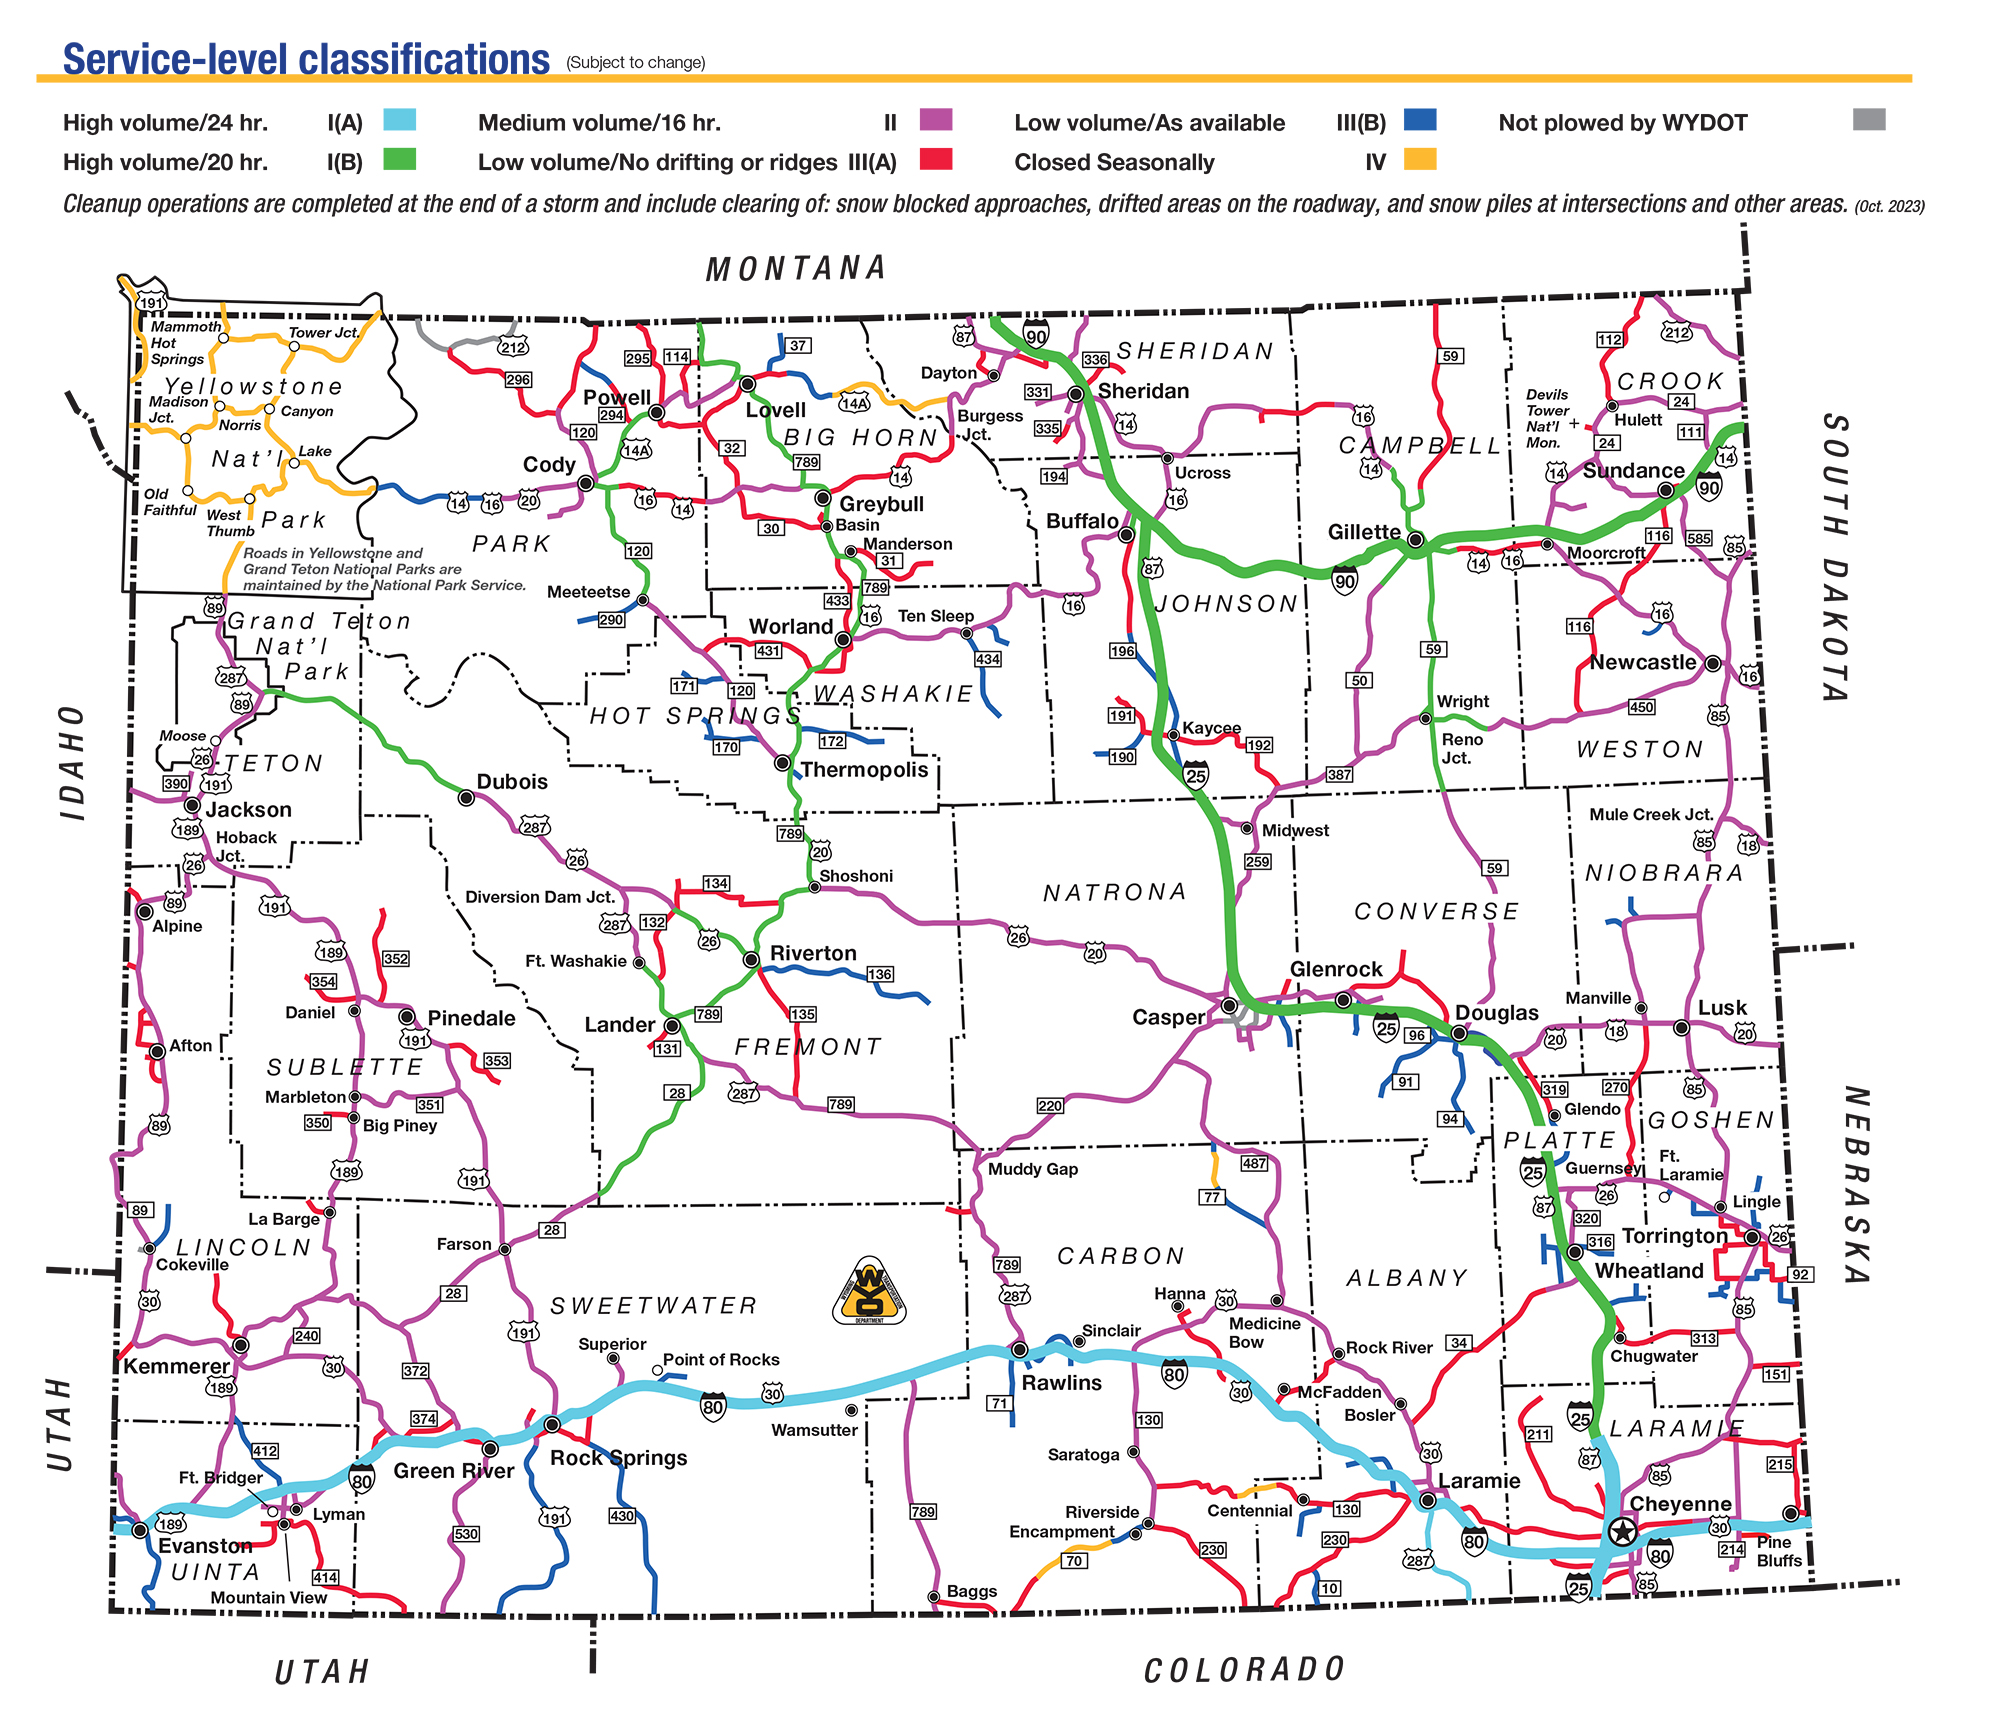 2023 Snow plow priority map with legend.jpg (2023 Snow plow priority map with legend)